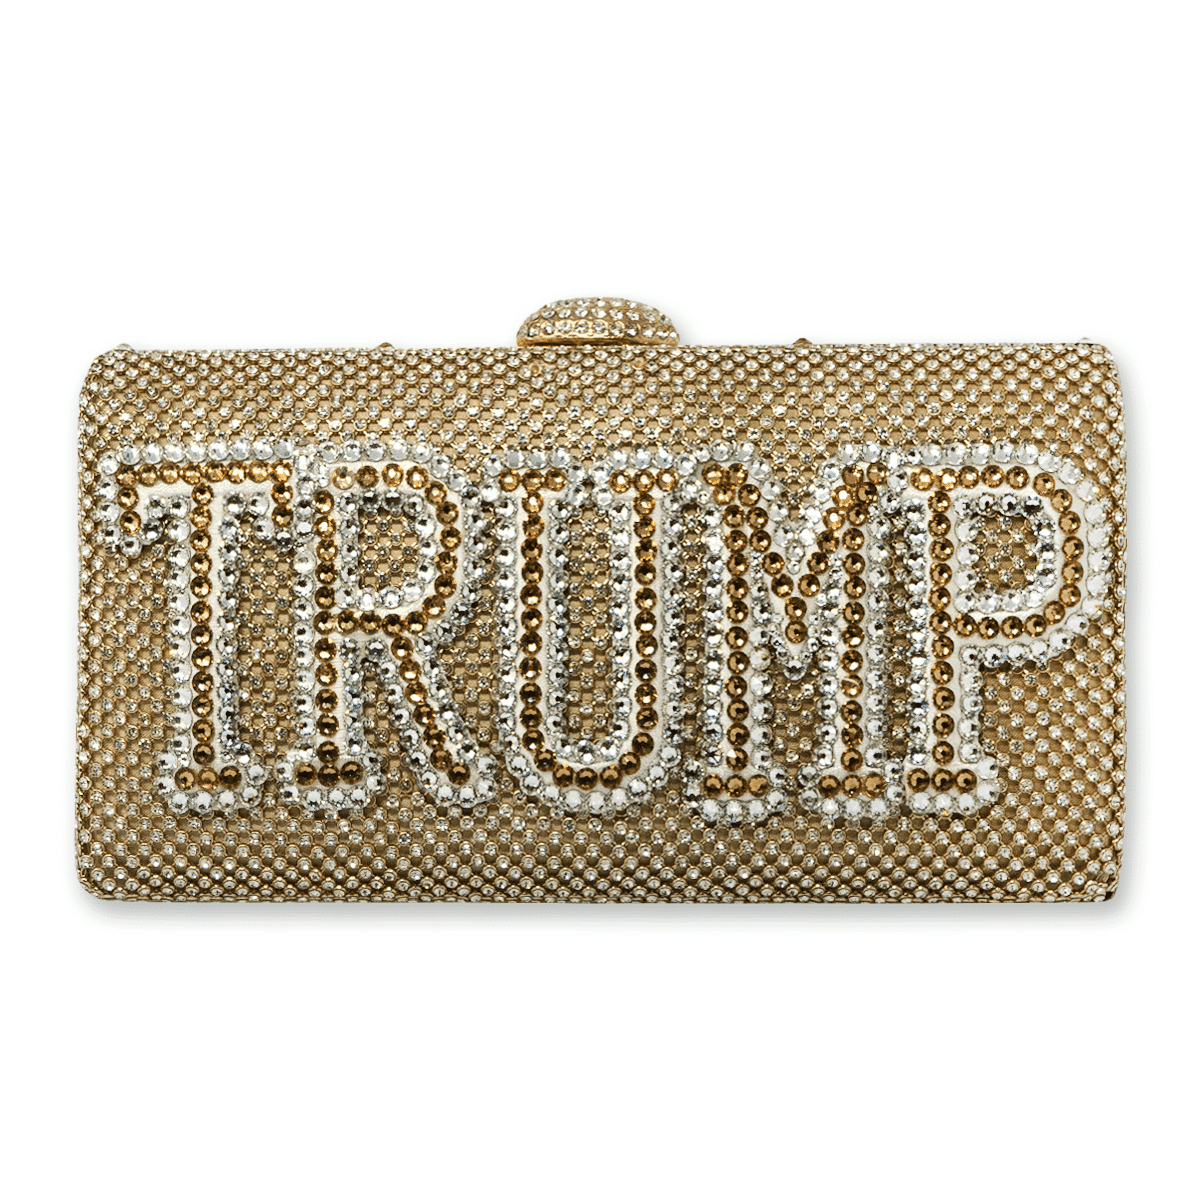 Image of Bling Clutch - Gold